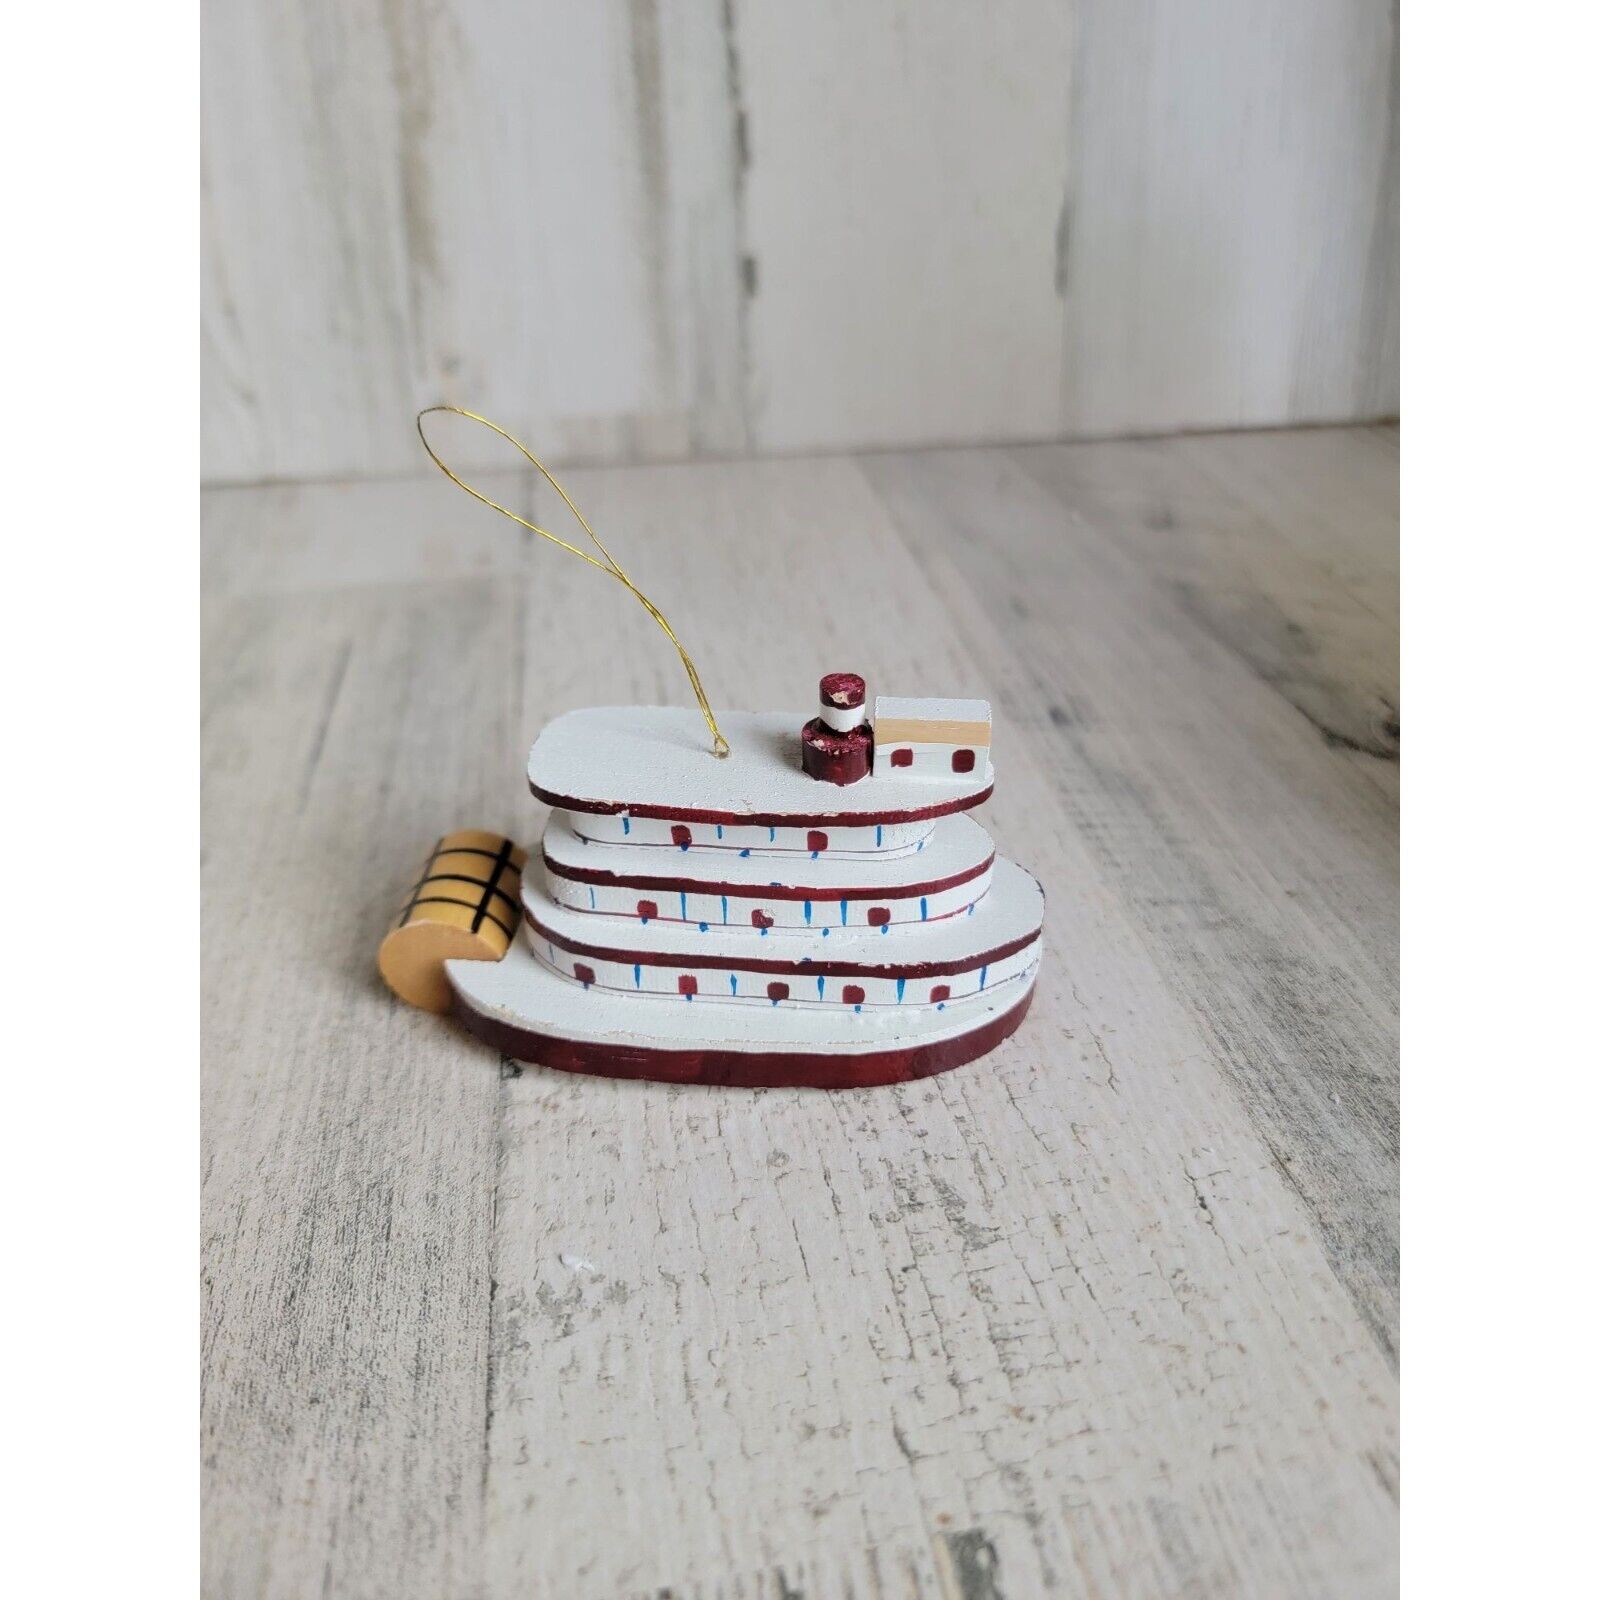 Wooden red boat fairy vintage ornament Xmas